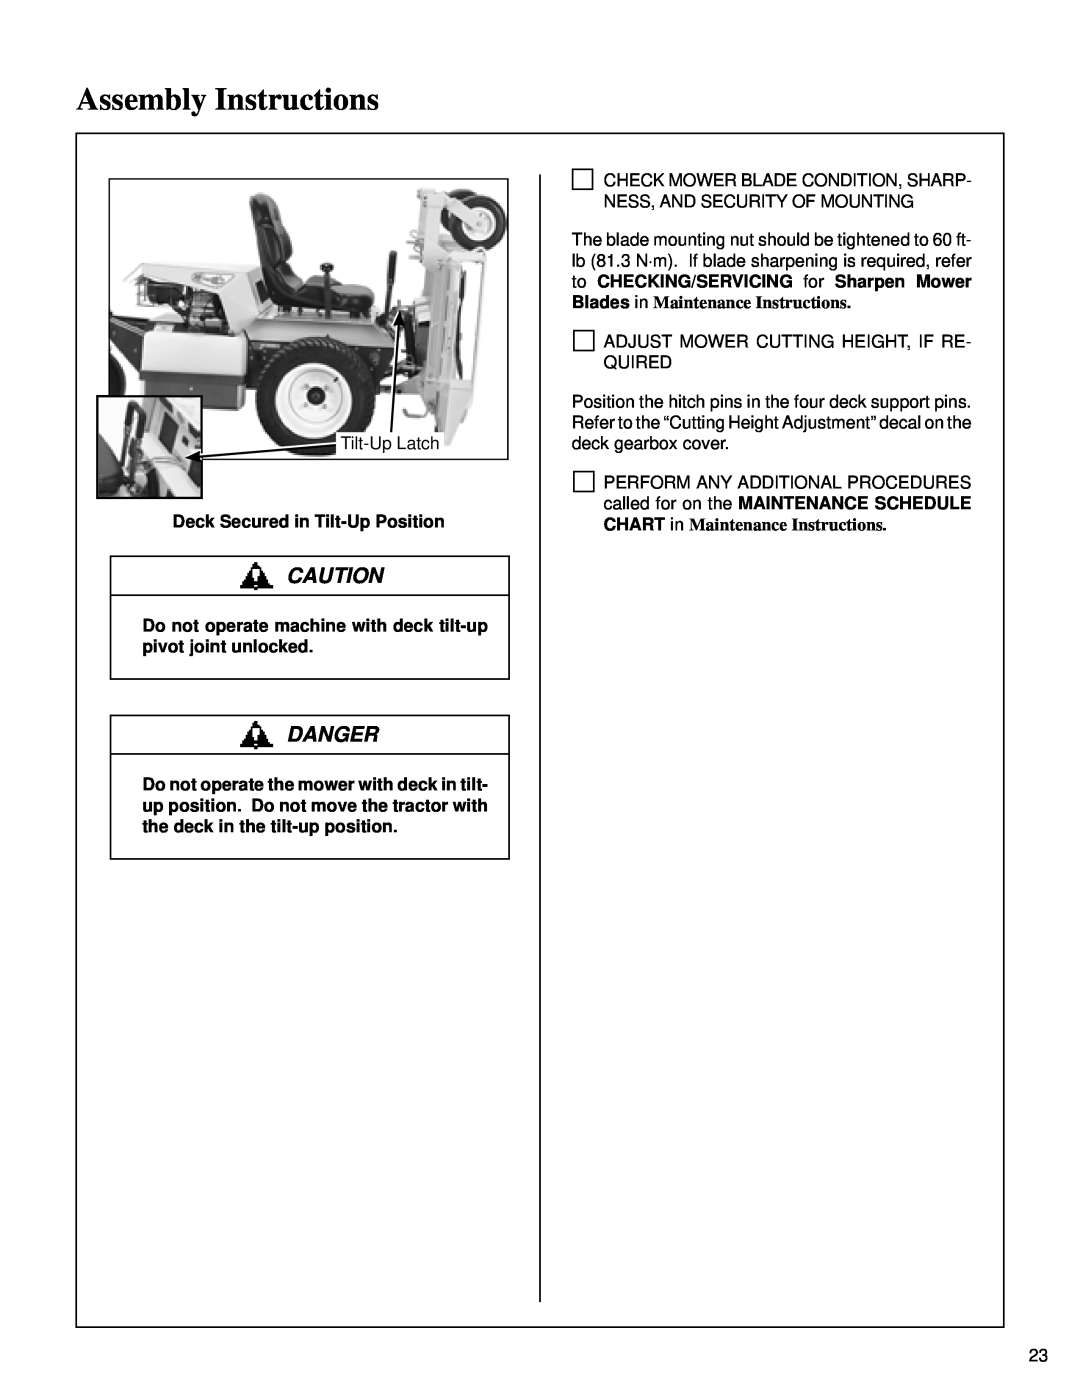 Briggs & Stratton MB (18 HP) owner manual Assembly Instructions, Danger, Deck Secured in Tilt-Up Position 